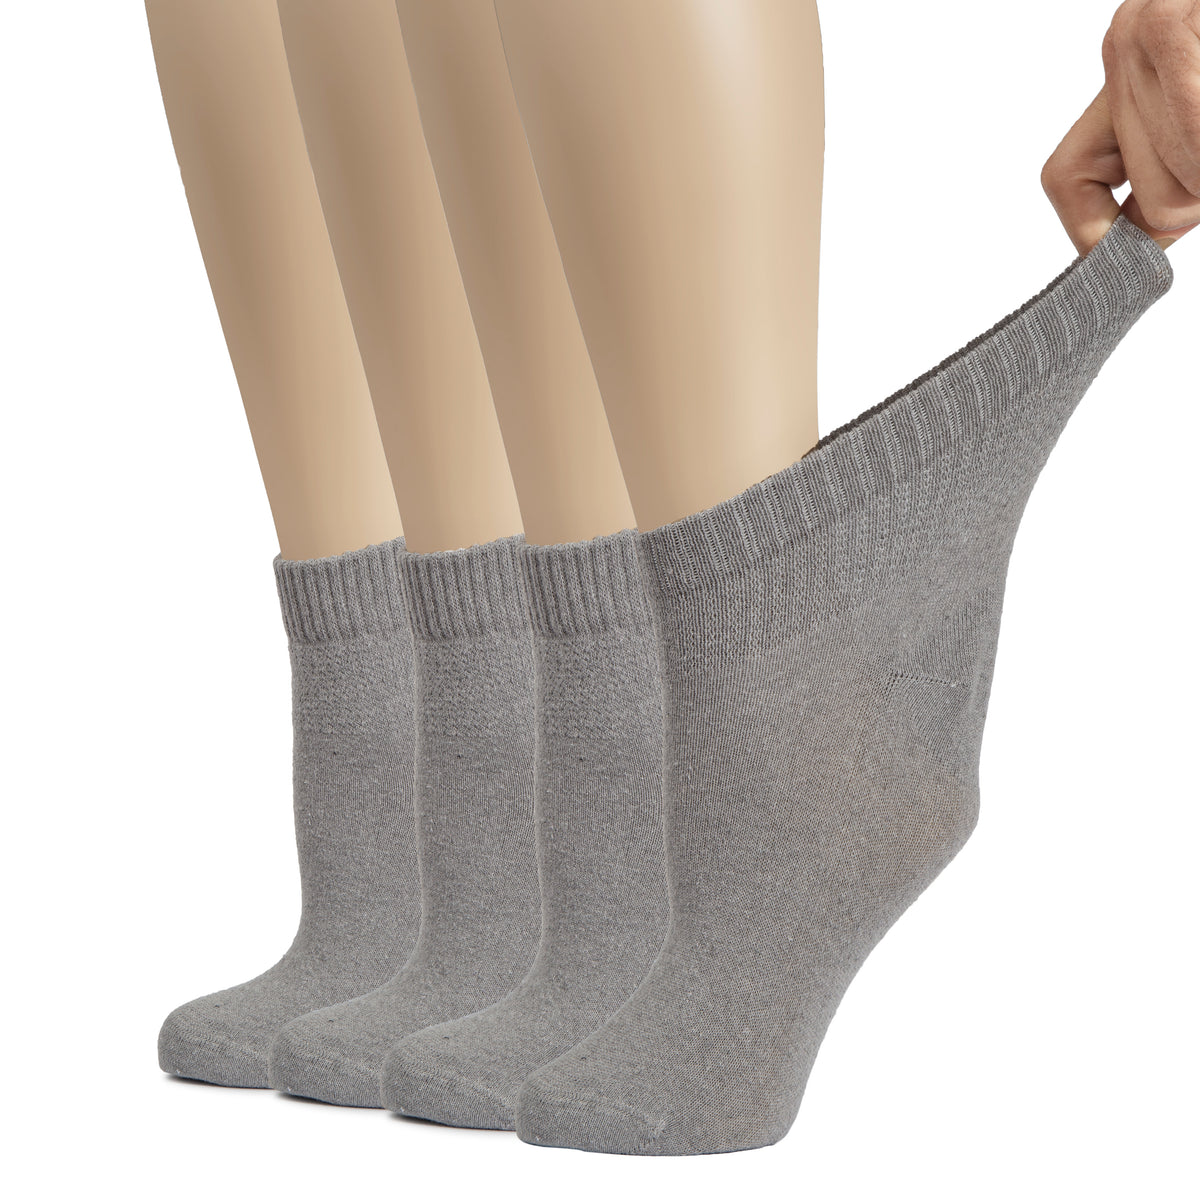 Women's Cotton Diabetic Ankle Socks in grey are showcased in the image, with a woman's feet wearing them in a row. The socks are designed for women with diabetes.